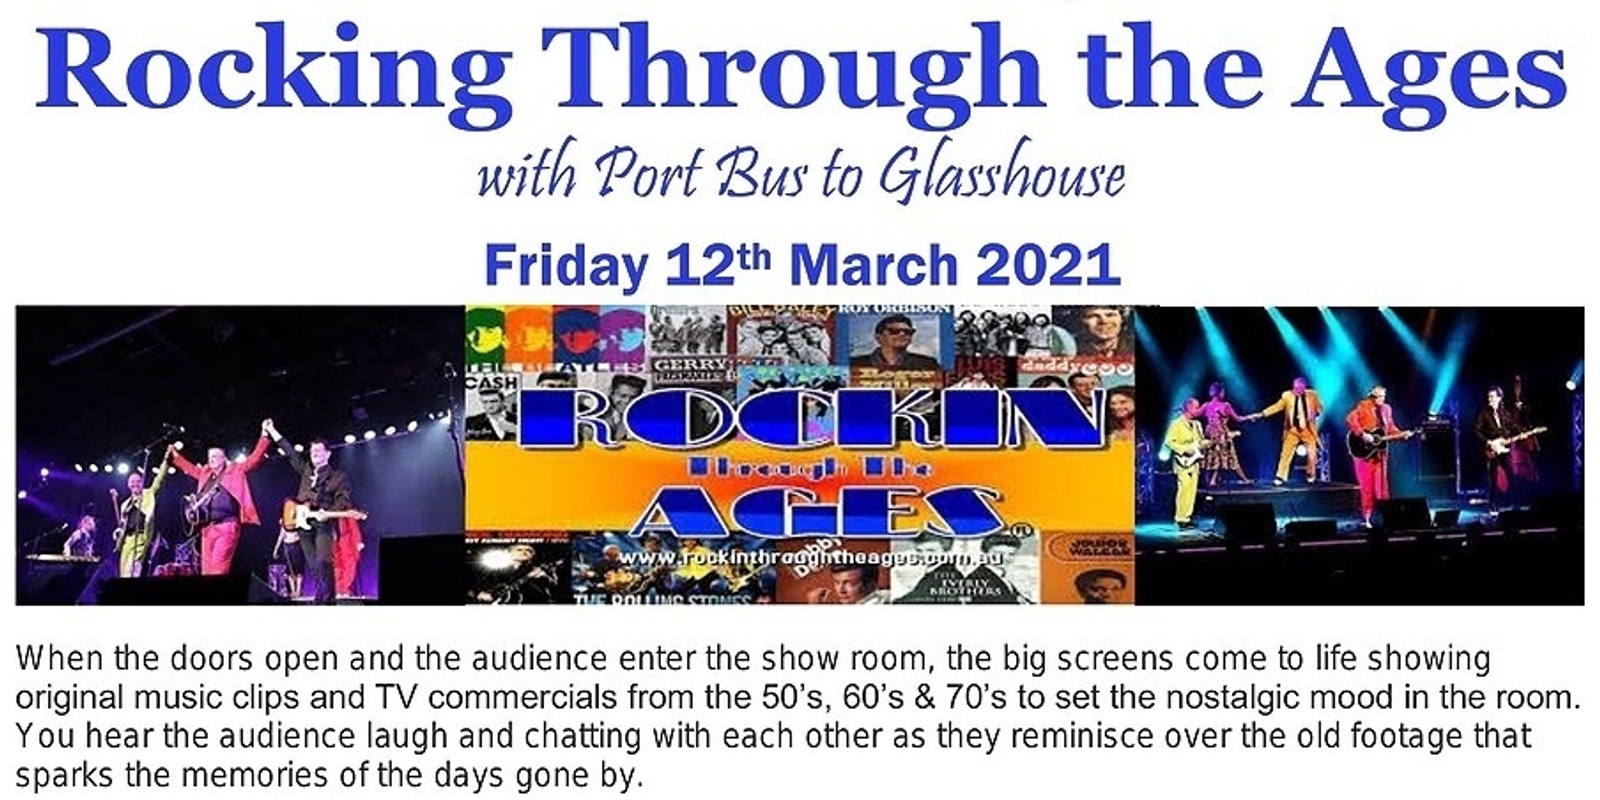 Banner image for Rocking Through the Ages with Port Bus to Glasshouse